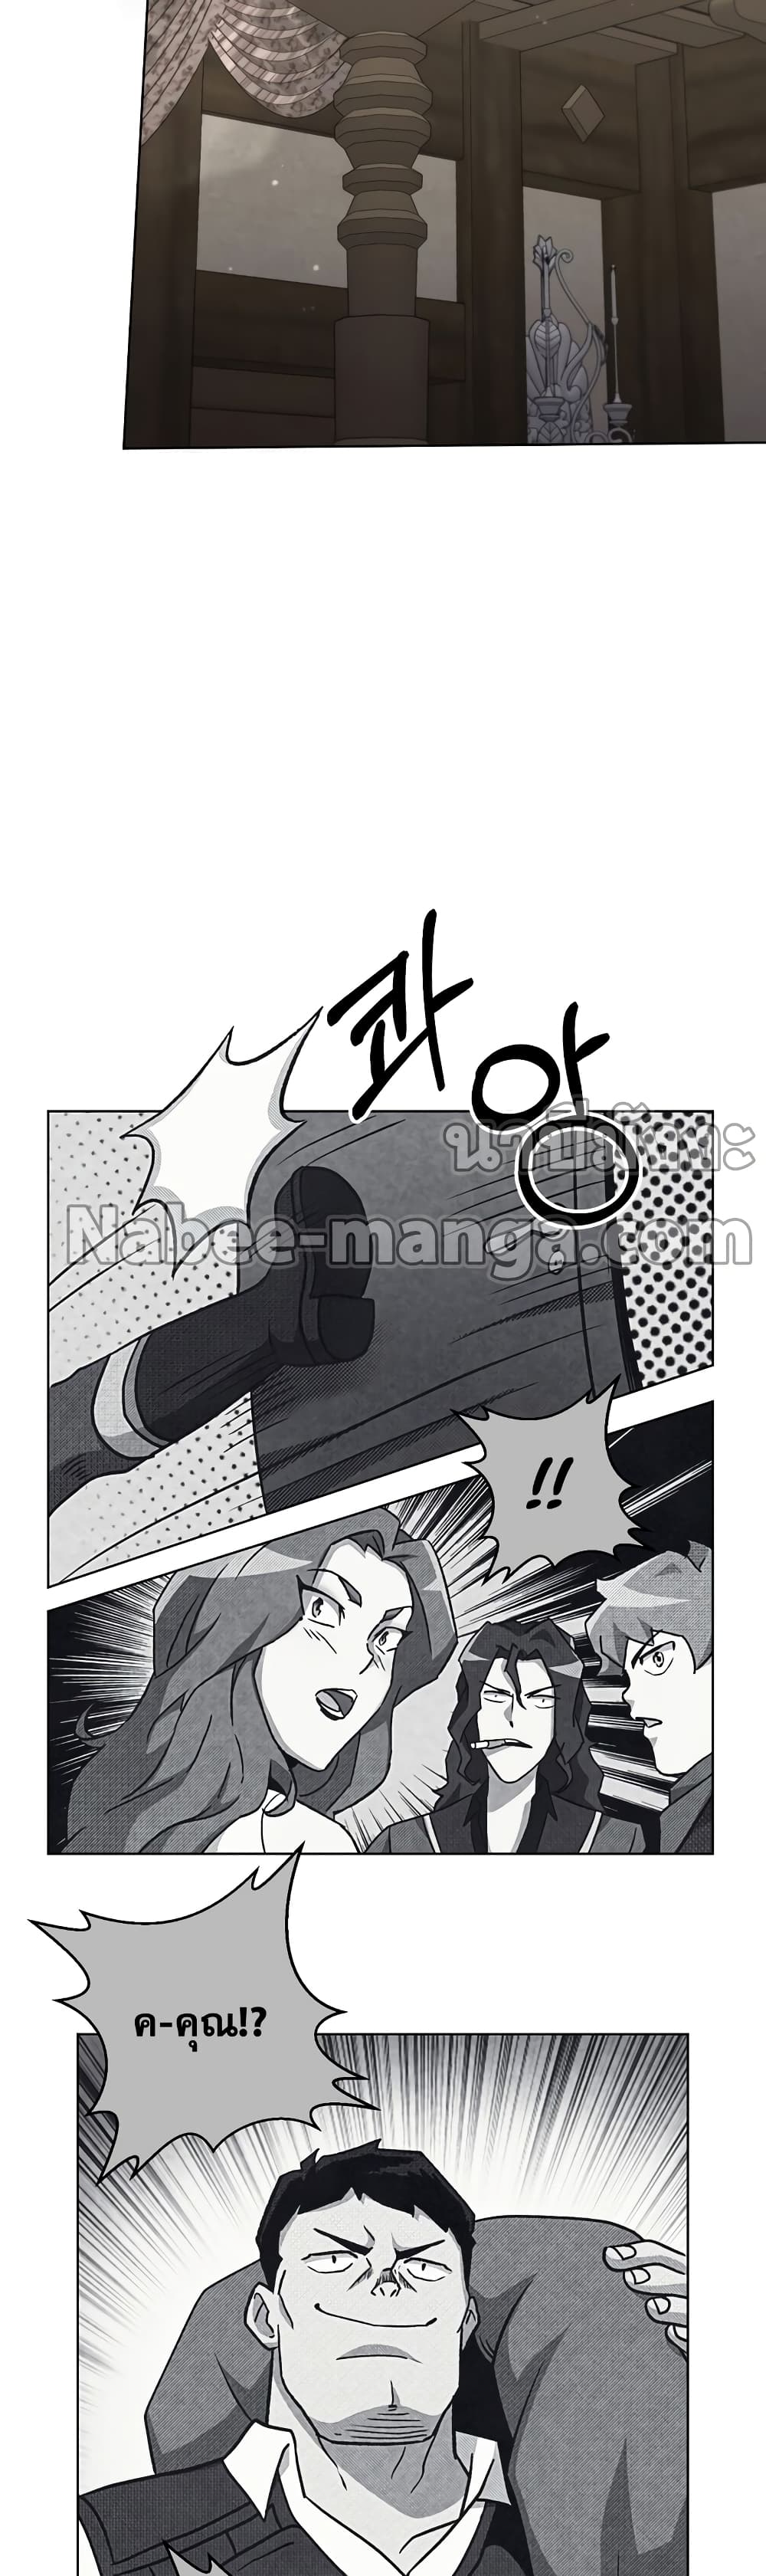 Surviving in an Action Manhwa 24 (38)